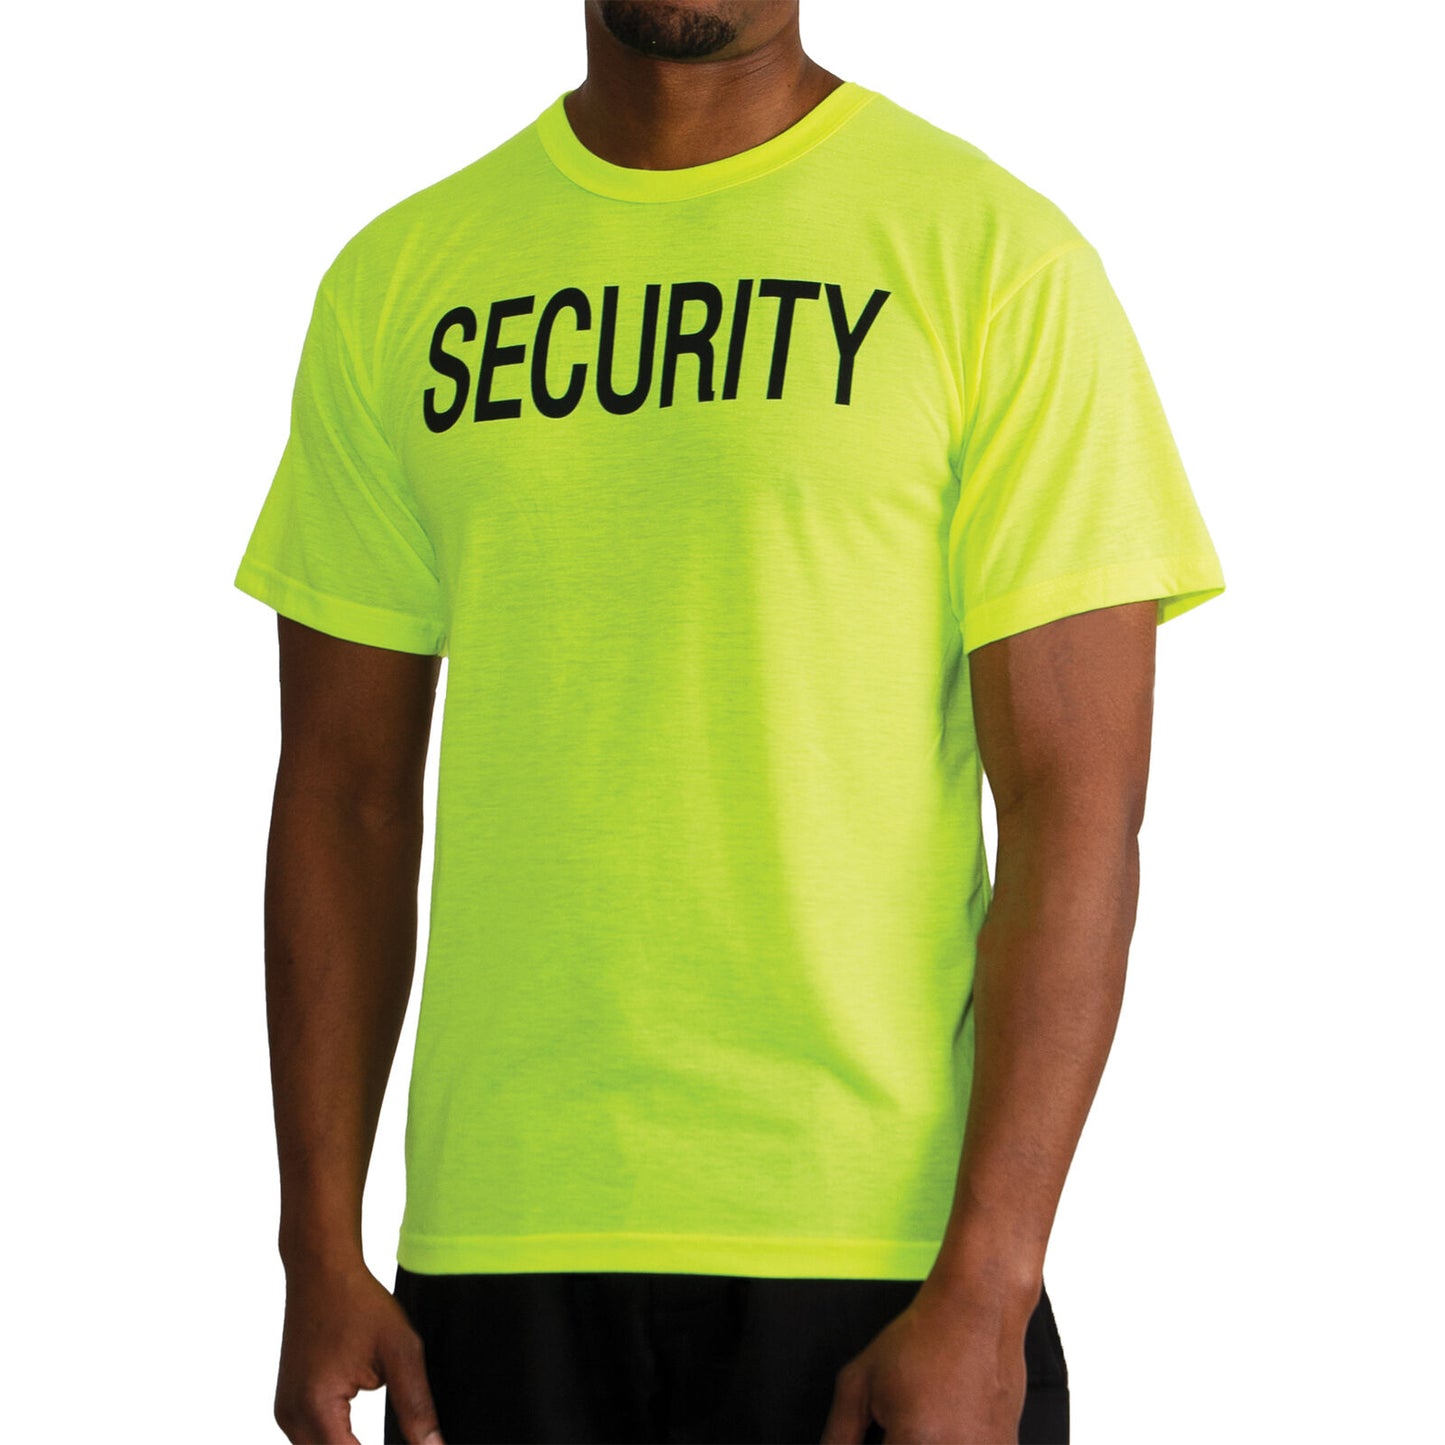 Men's 2-Sided "SECURITY" T-Shirt in Safety Neon Green